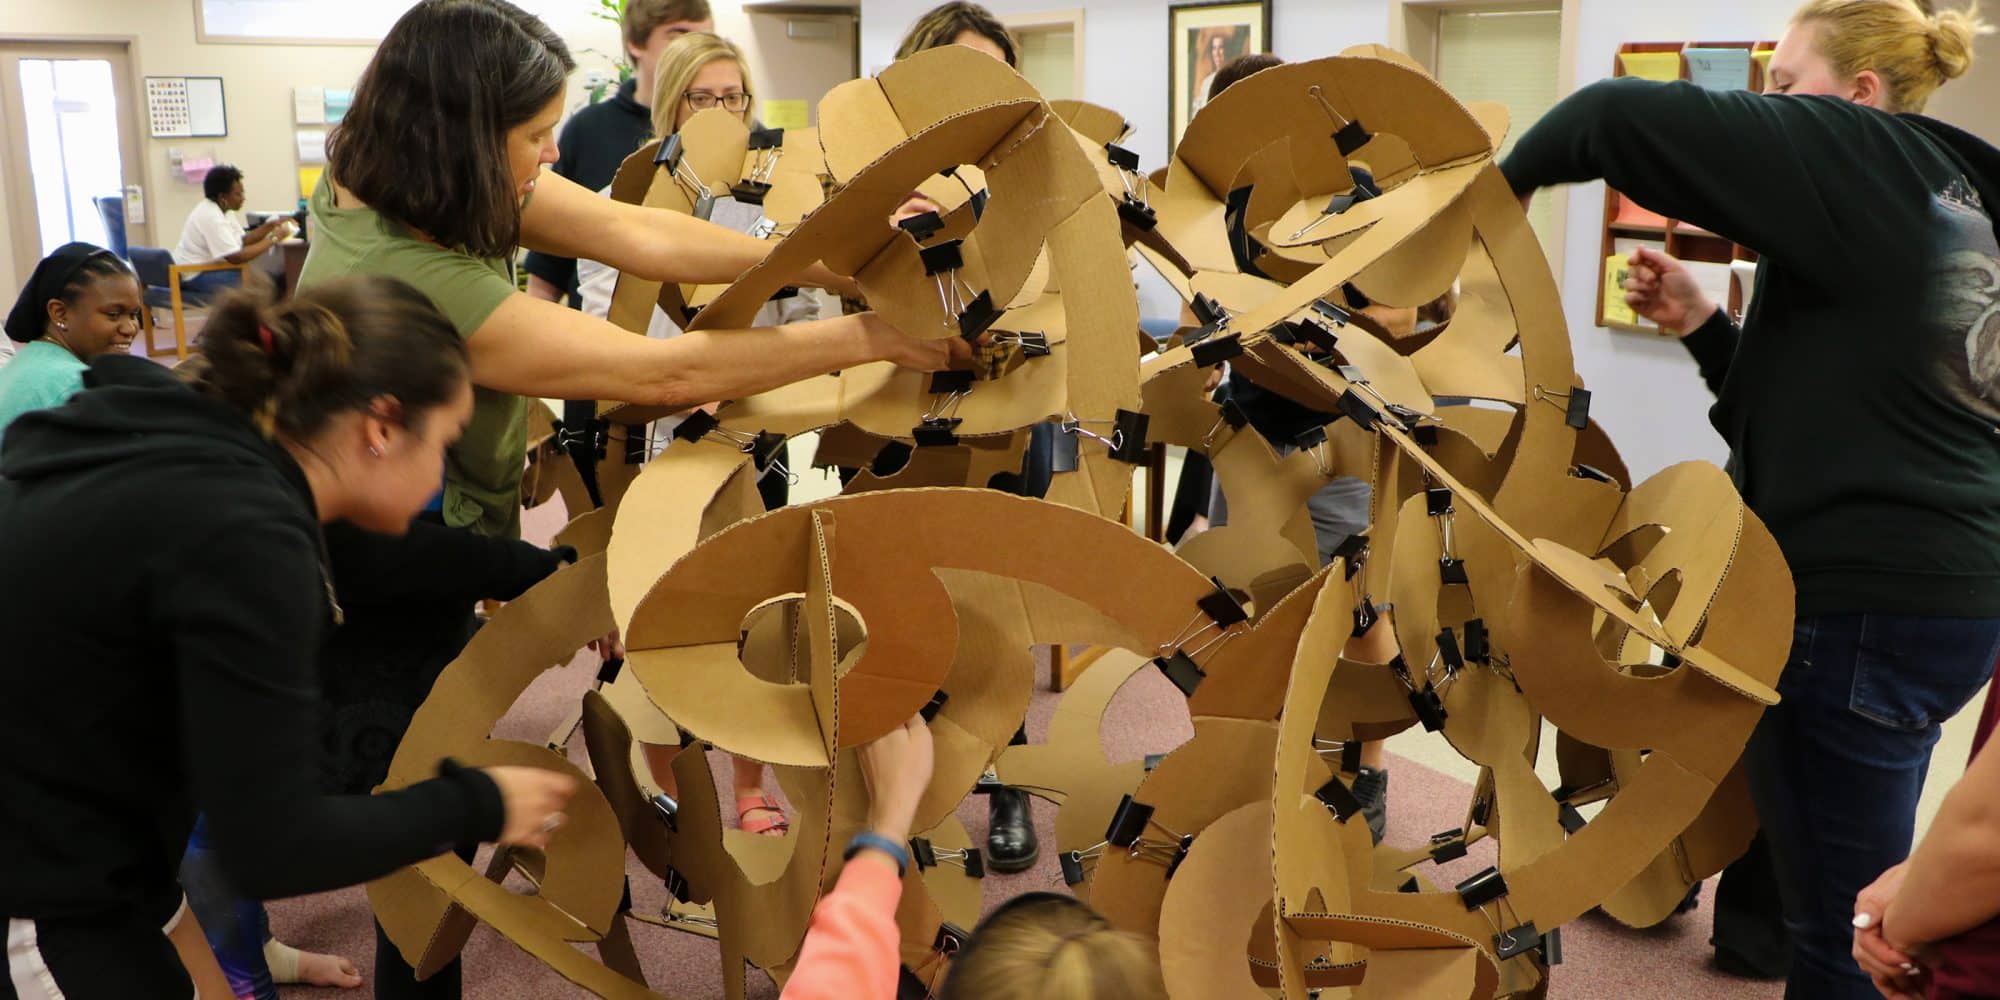 Students use cardboard and binder clips to build a sculpture